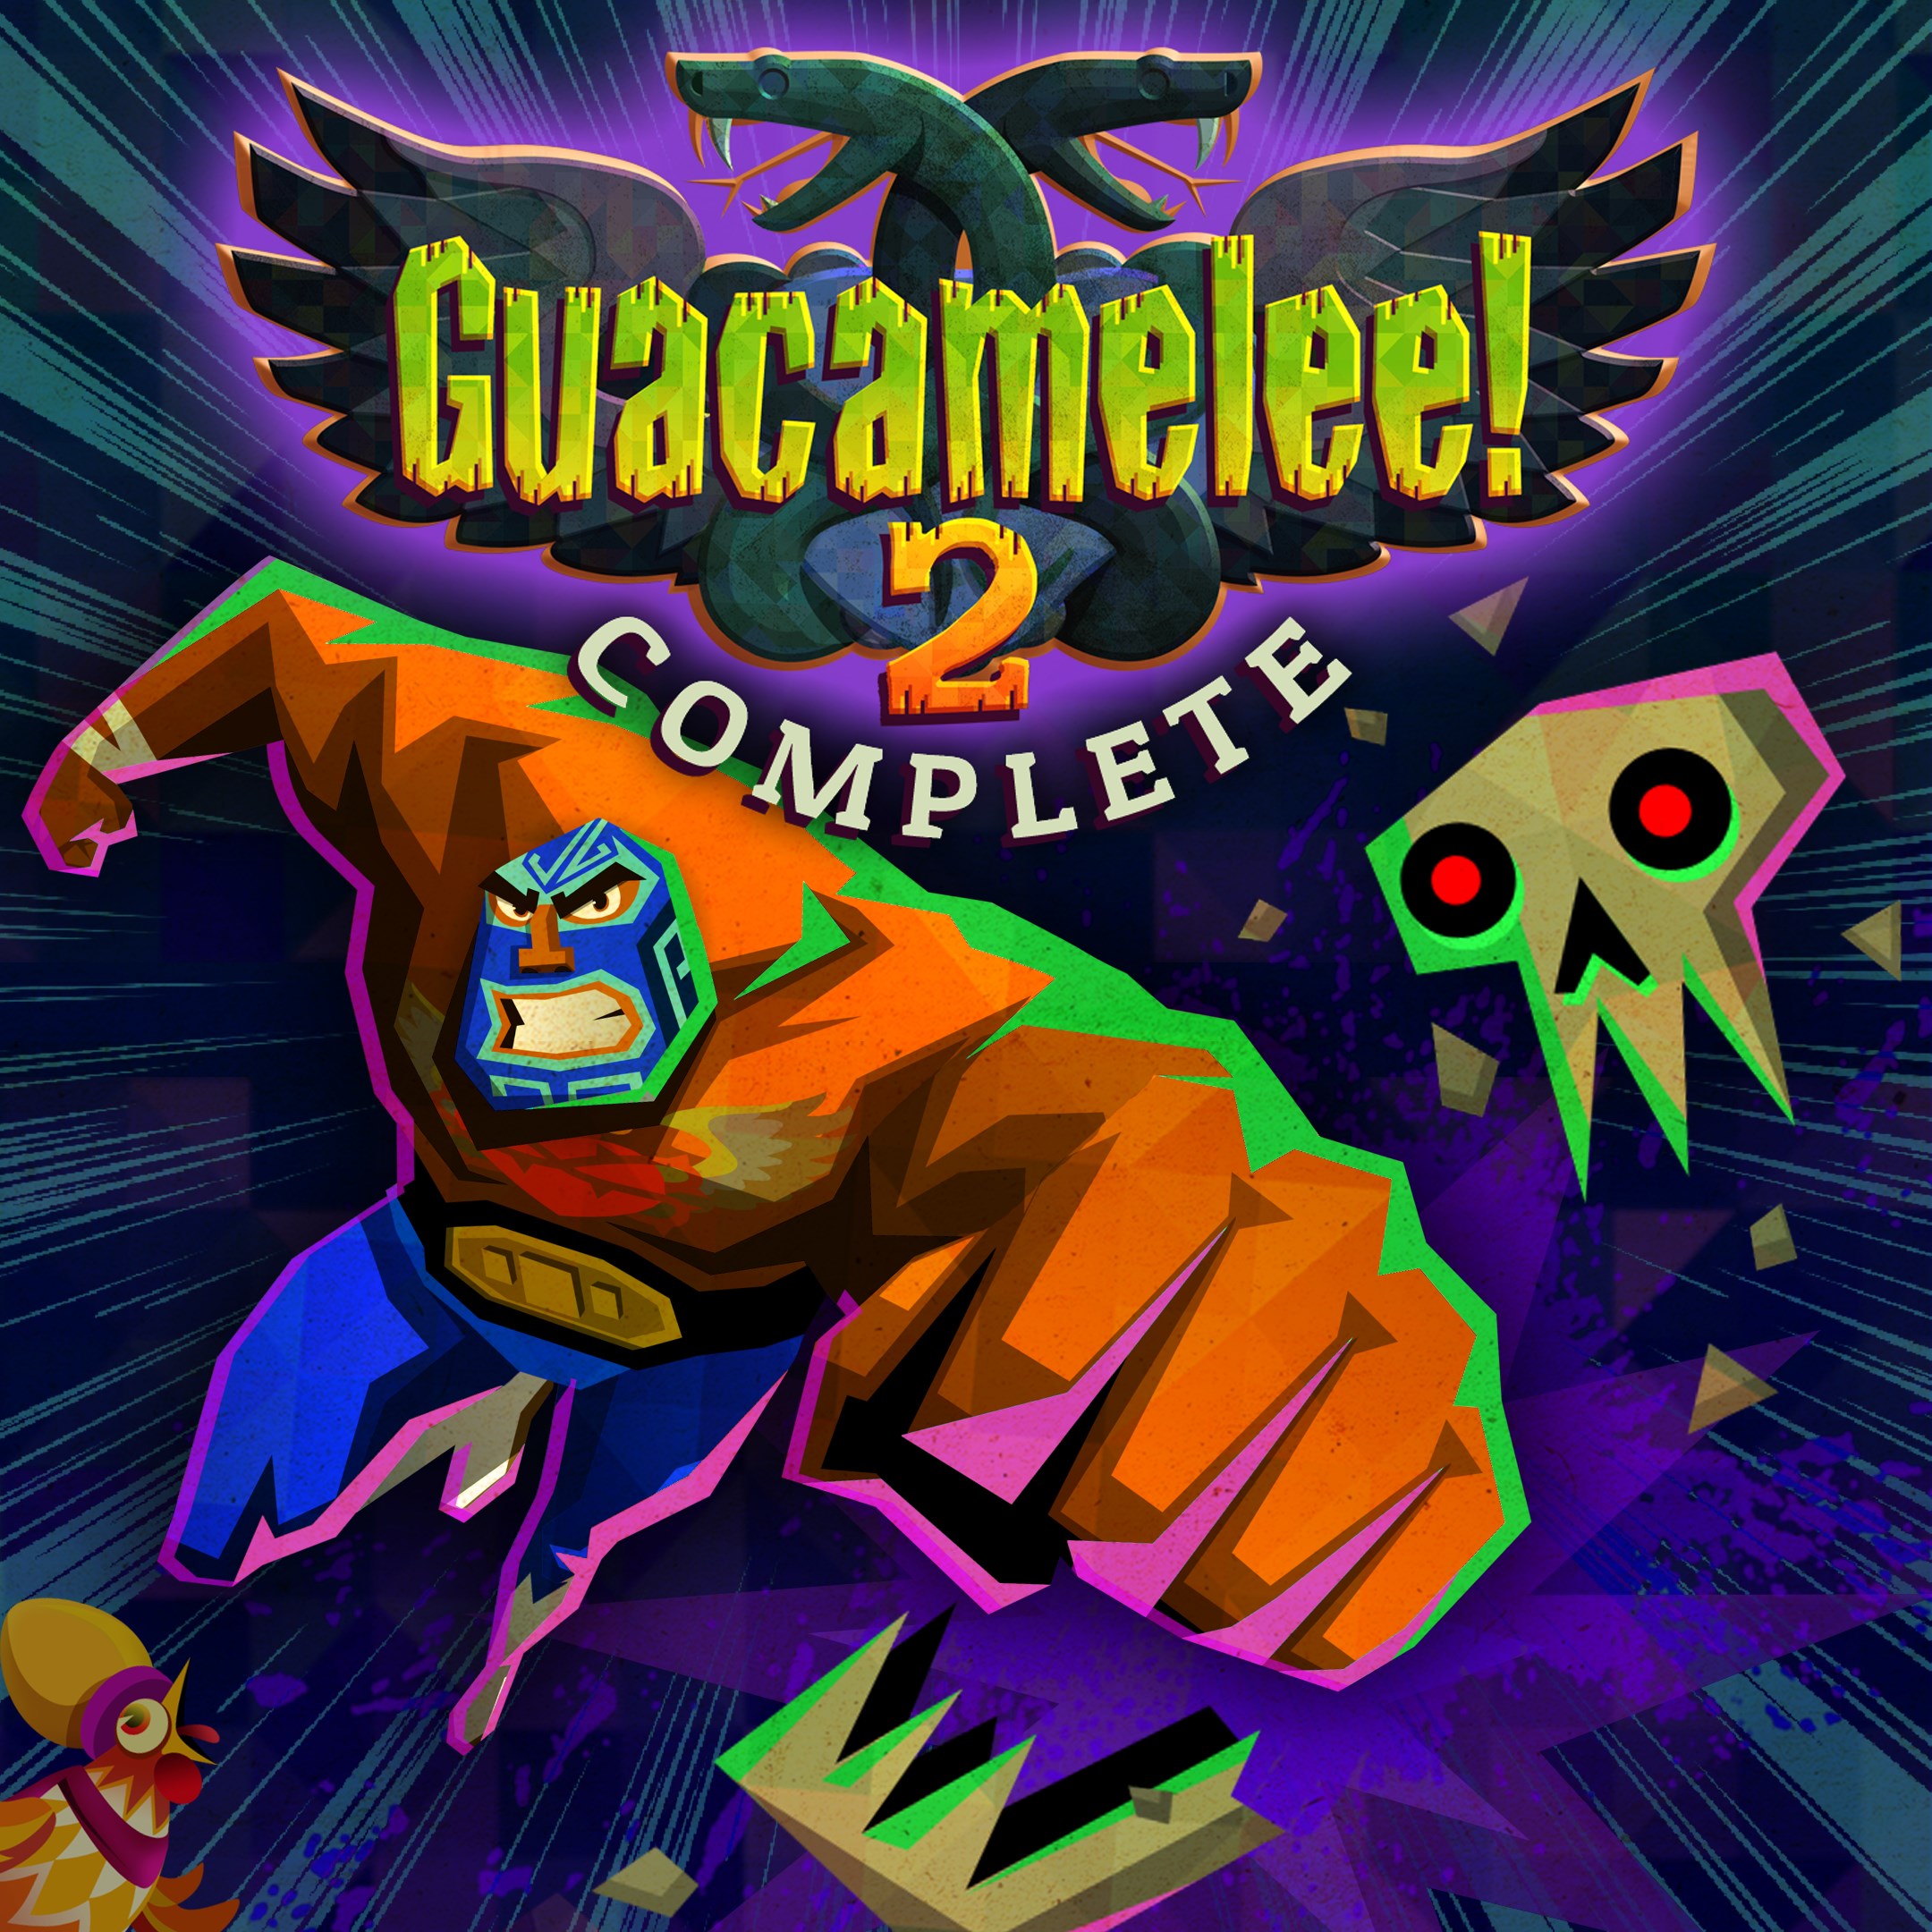 Guacamelee! 2 Complete technical specifications for laptop